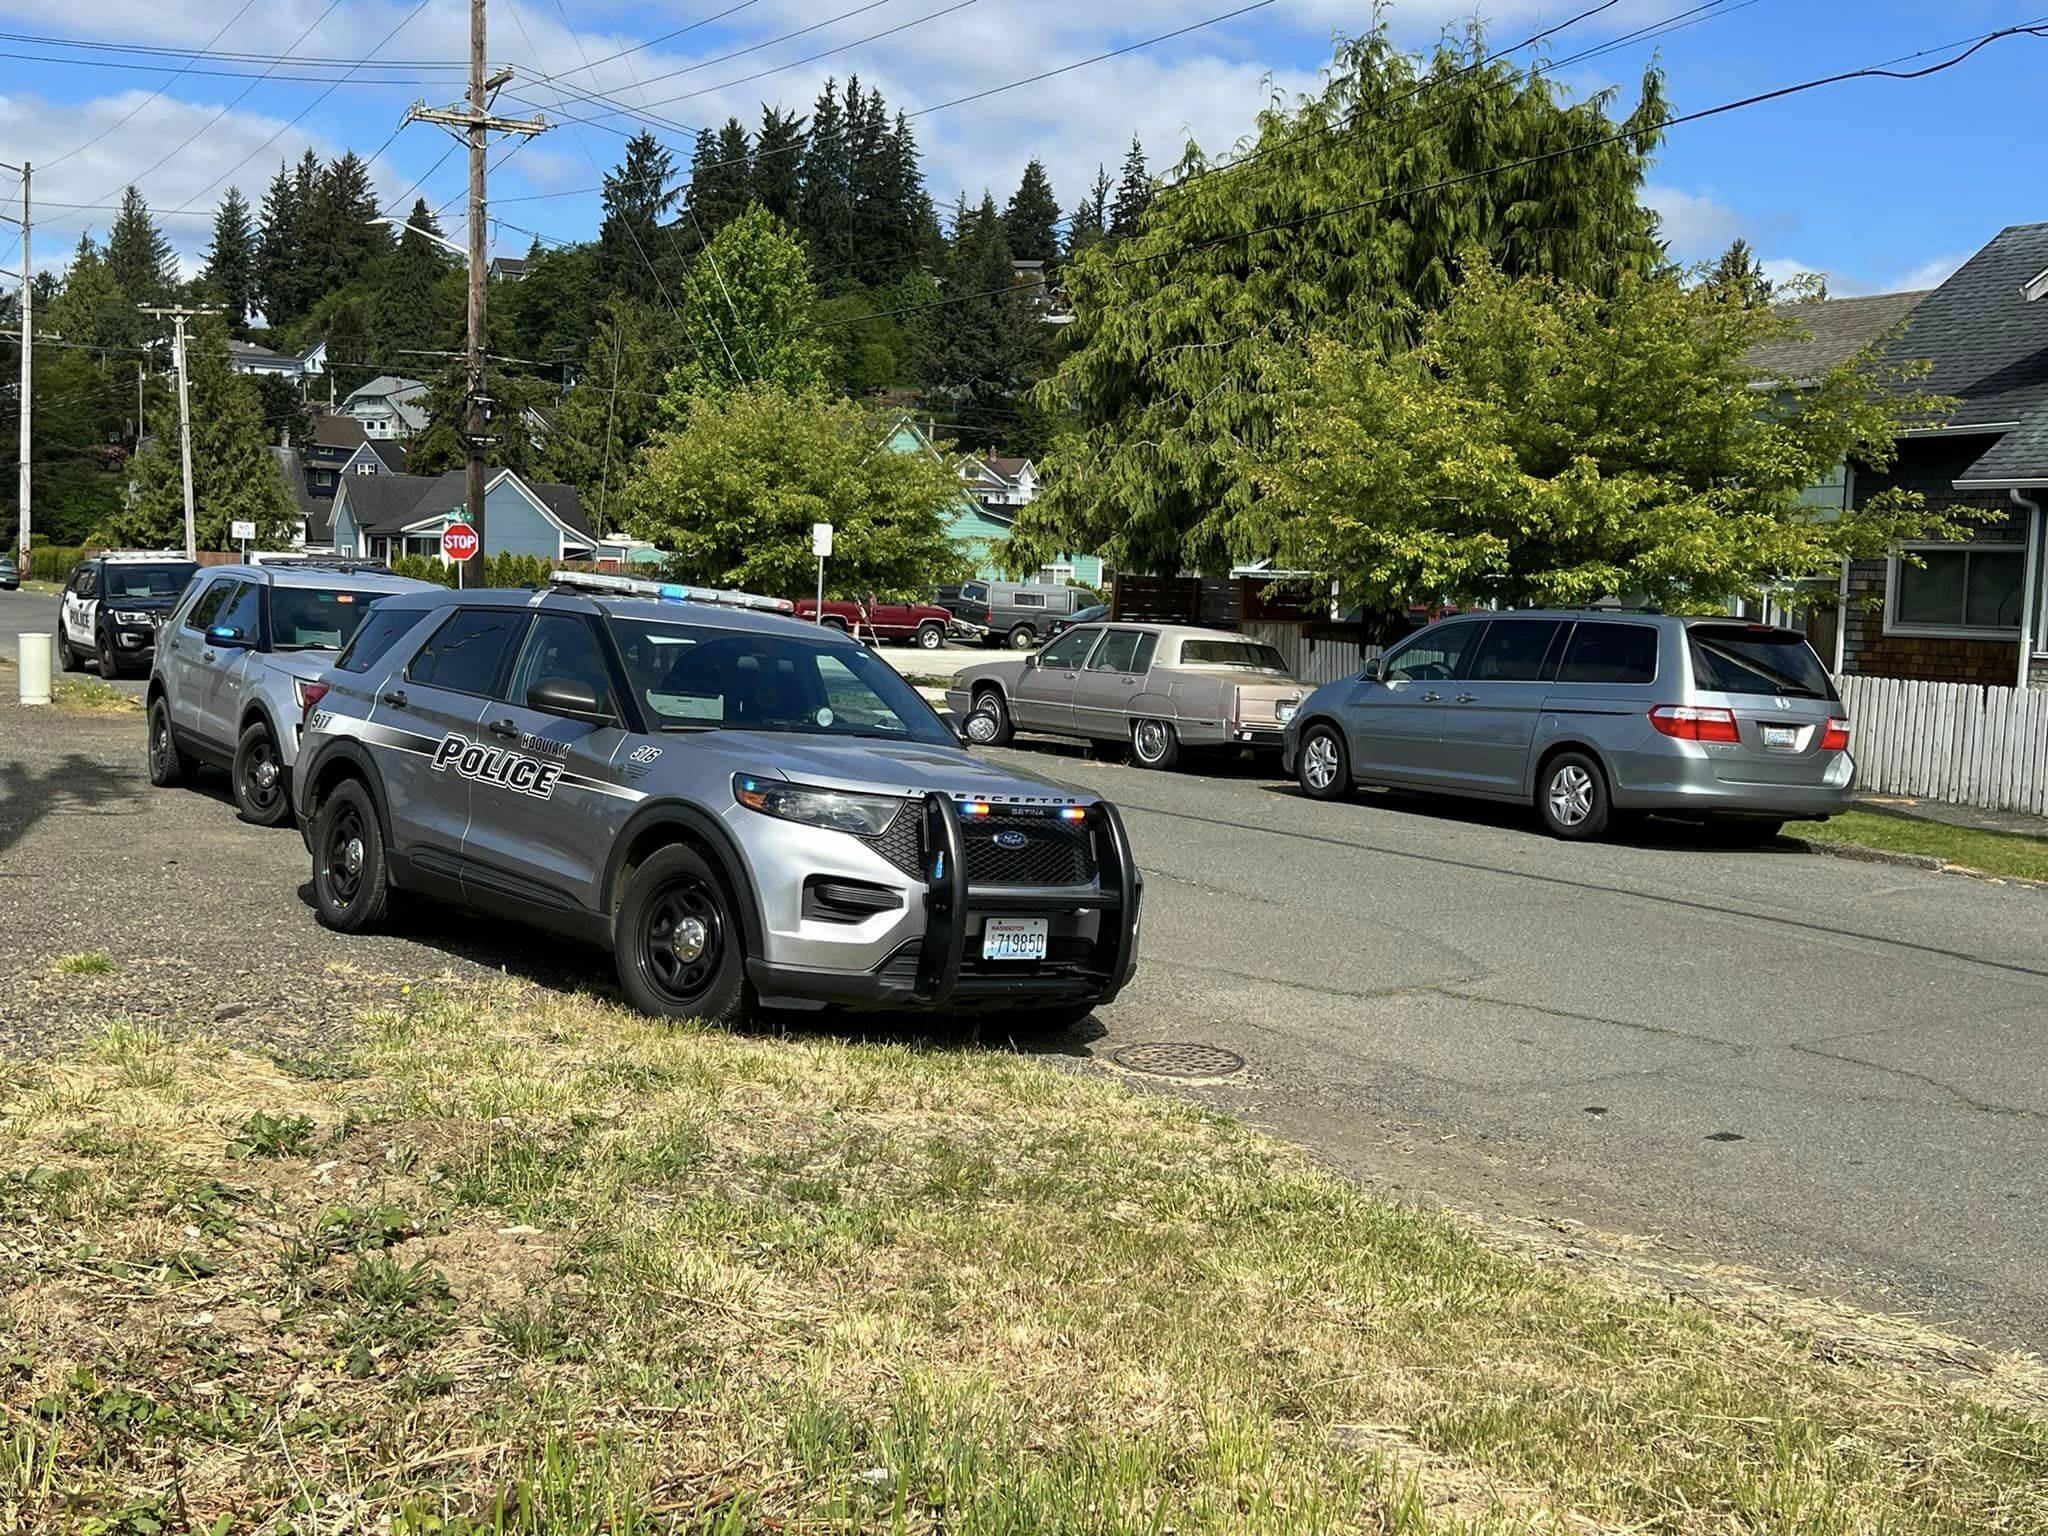 Members of the county’s drug task force and police from Aberdeen and Hoquiam worked together to arrest a pair of Hoquiam men following a roughly two-month investigation. (Courtesy photo / Hoquiam Police Department)